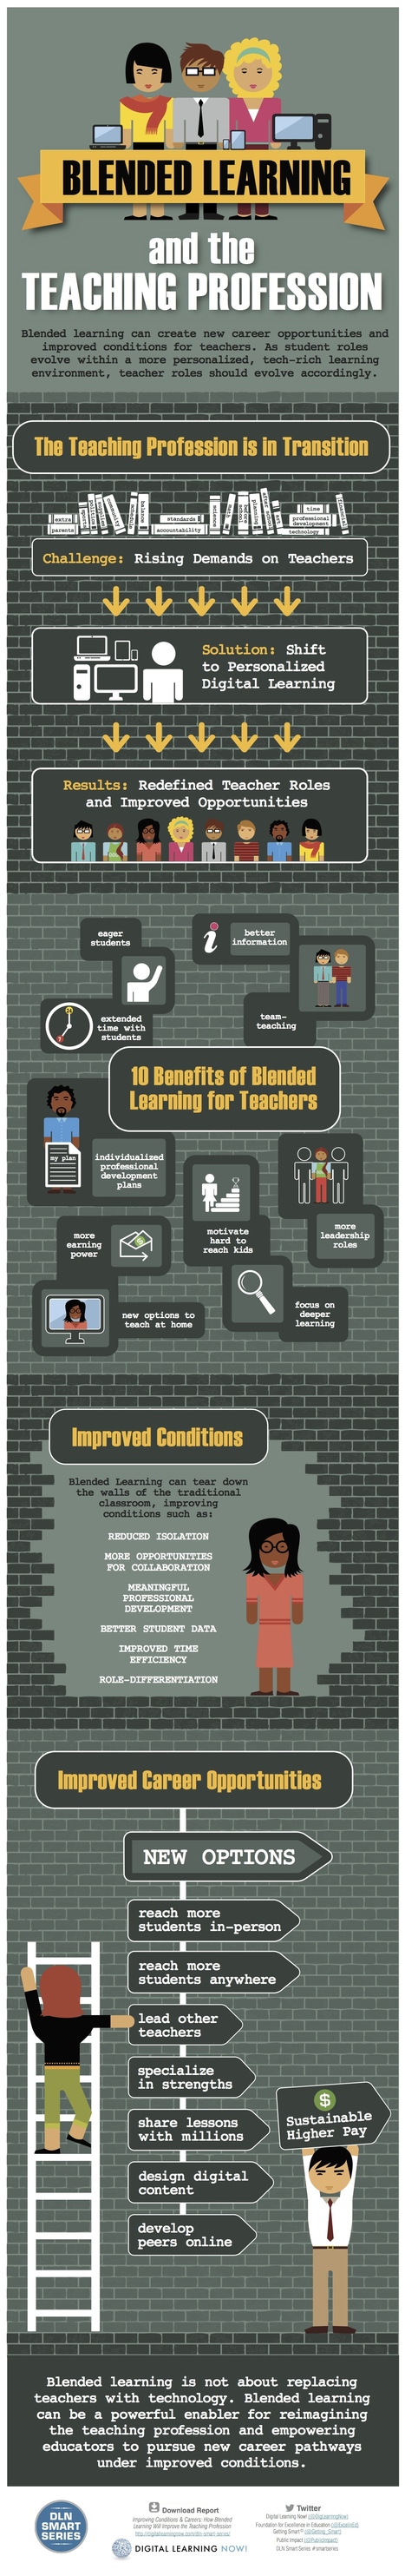 Blended Learning & The Teaching Profession [Infographic] | Didactics and Technology in Education | Scoop.it